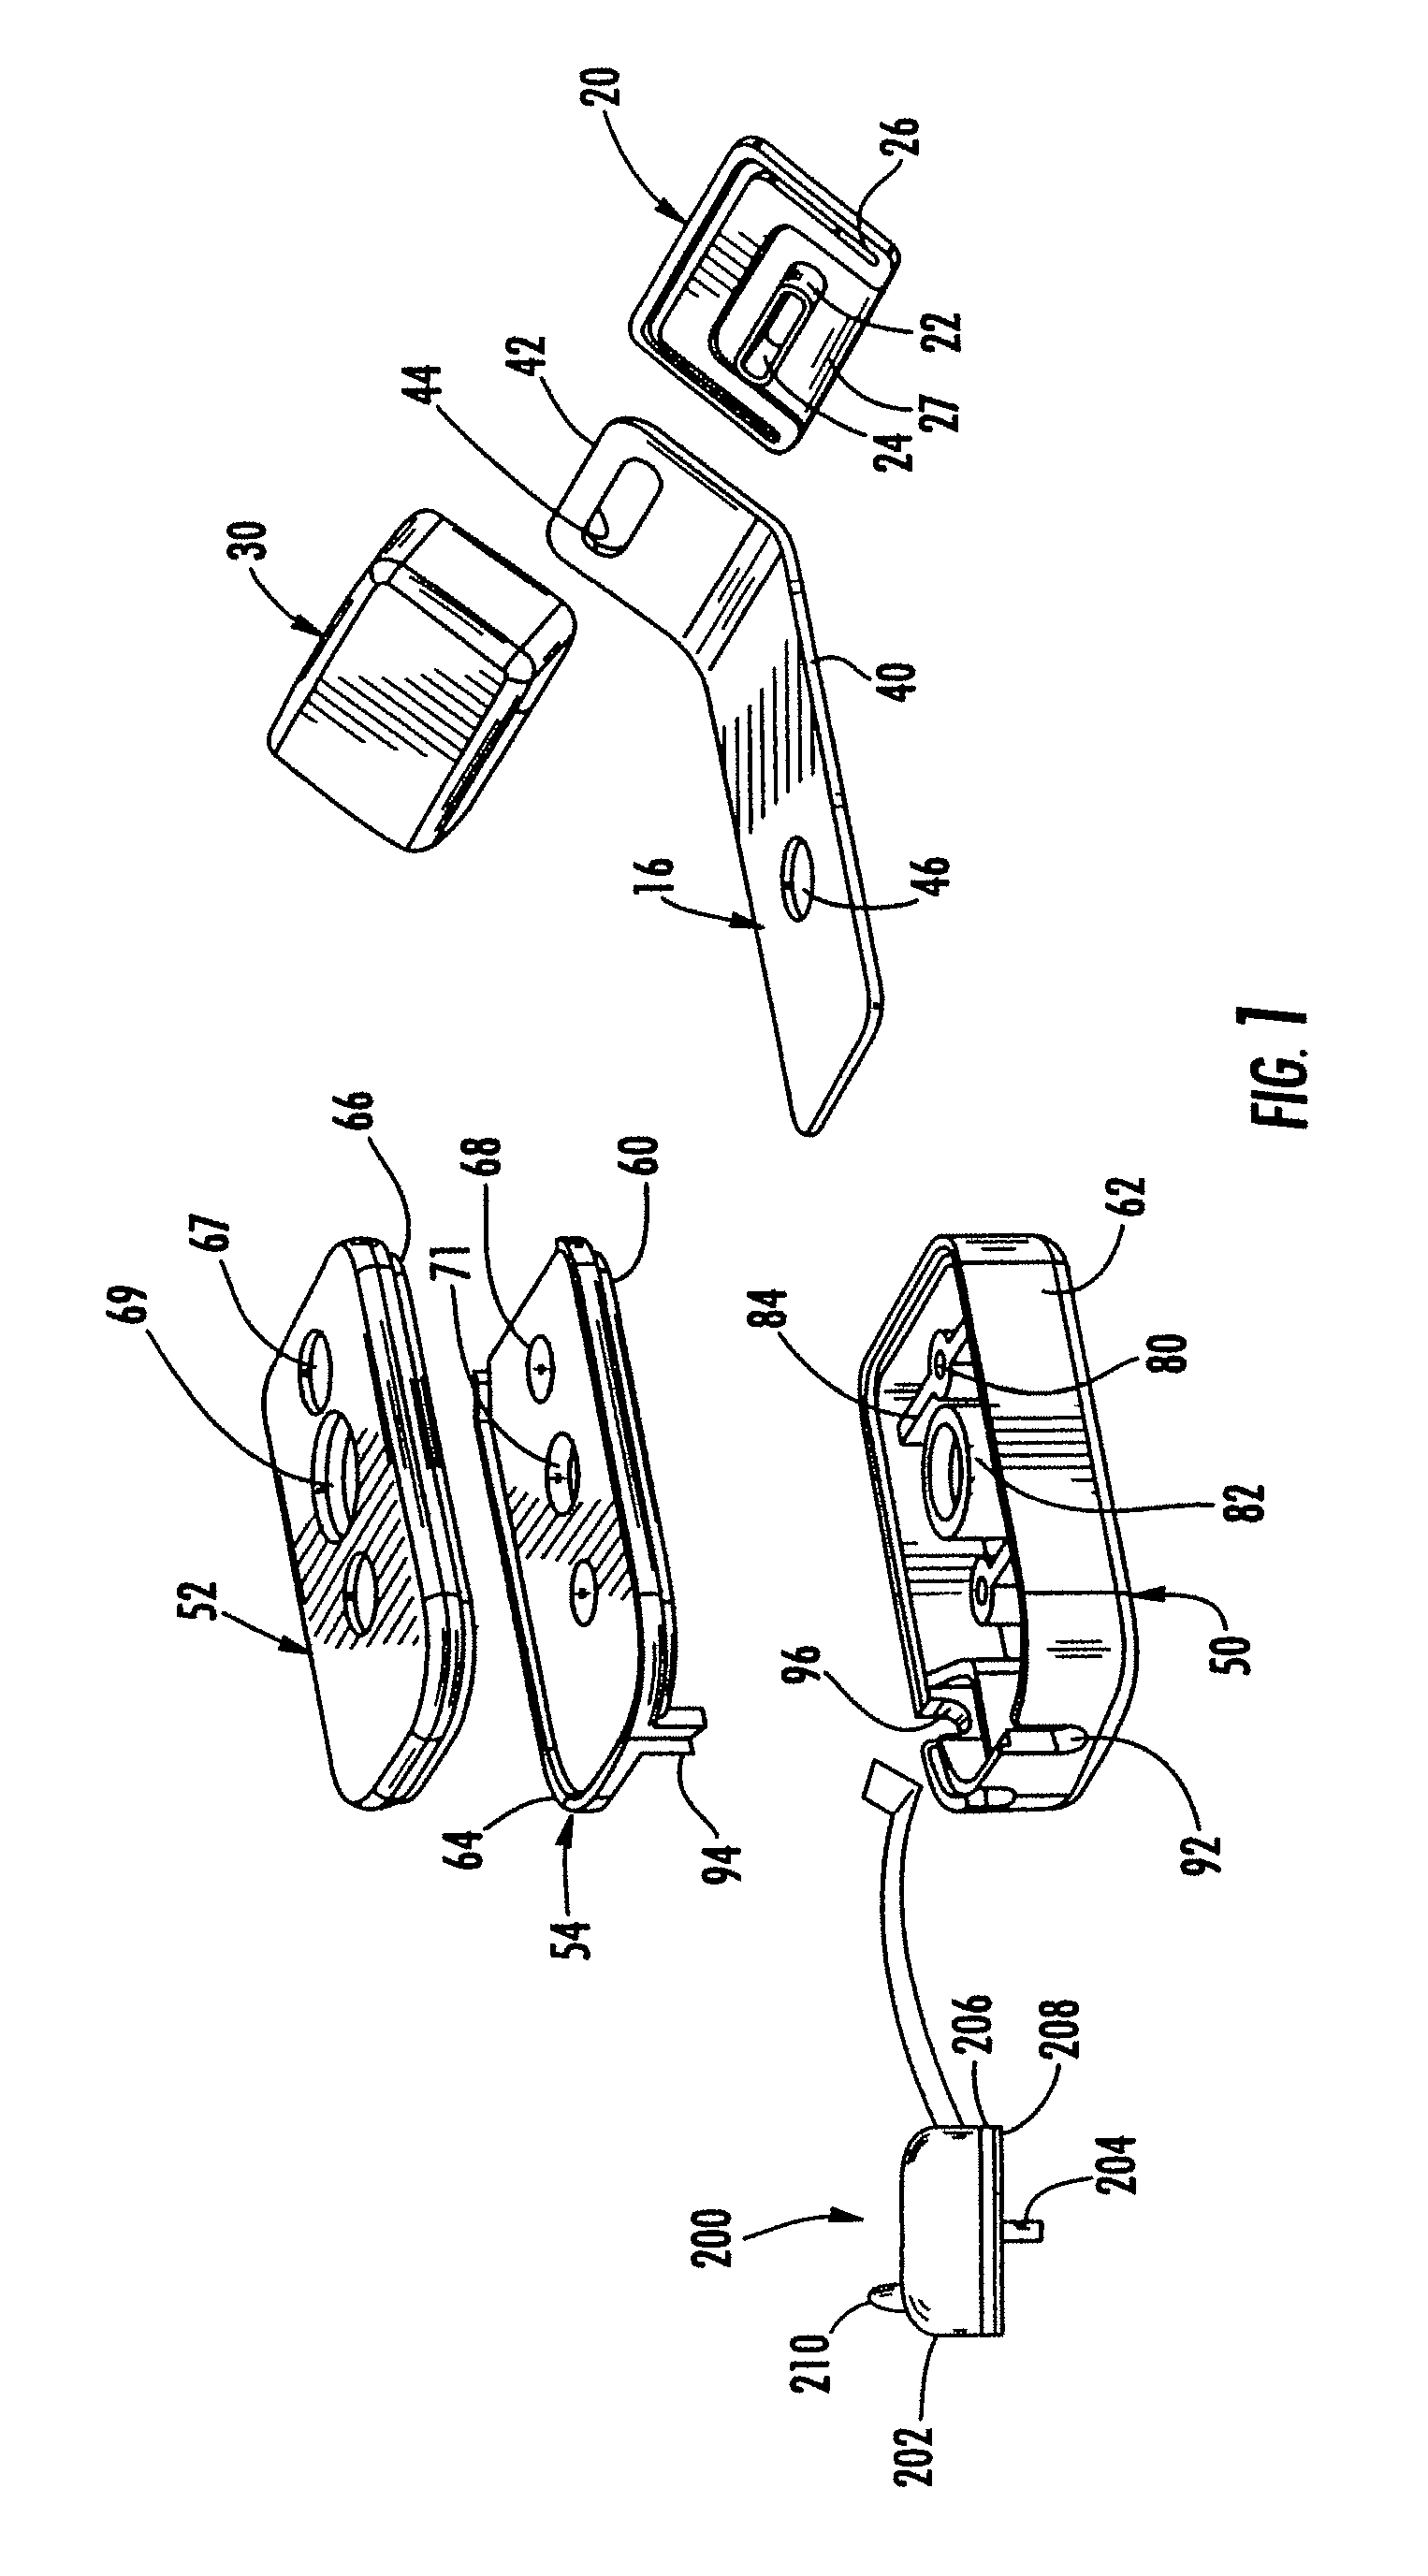 Security device for hinged products